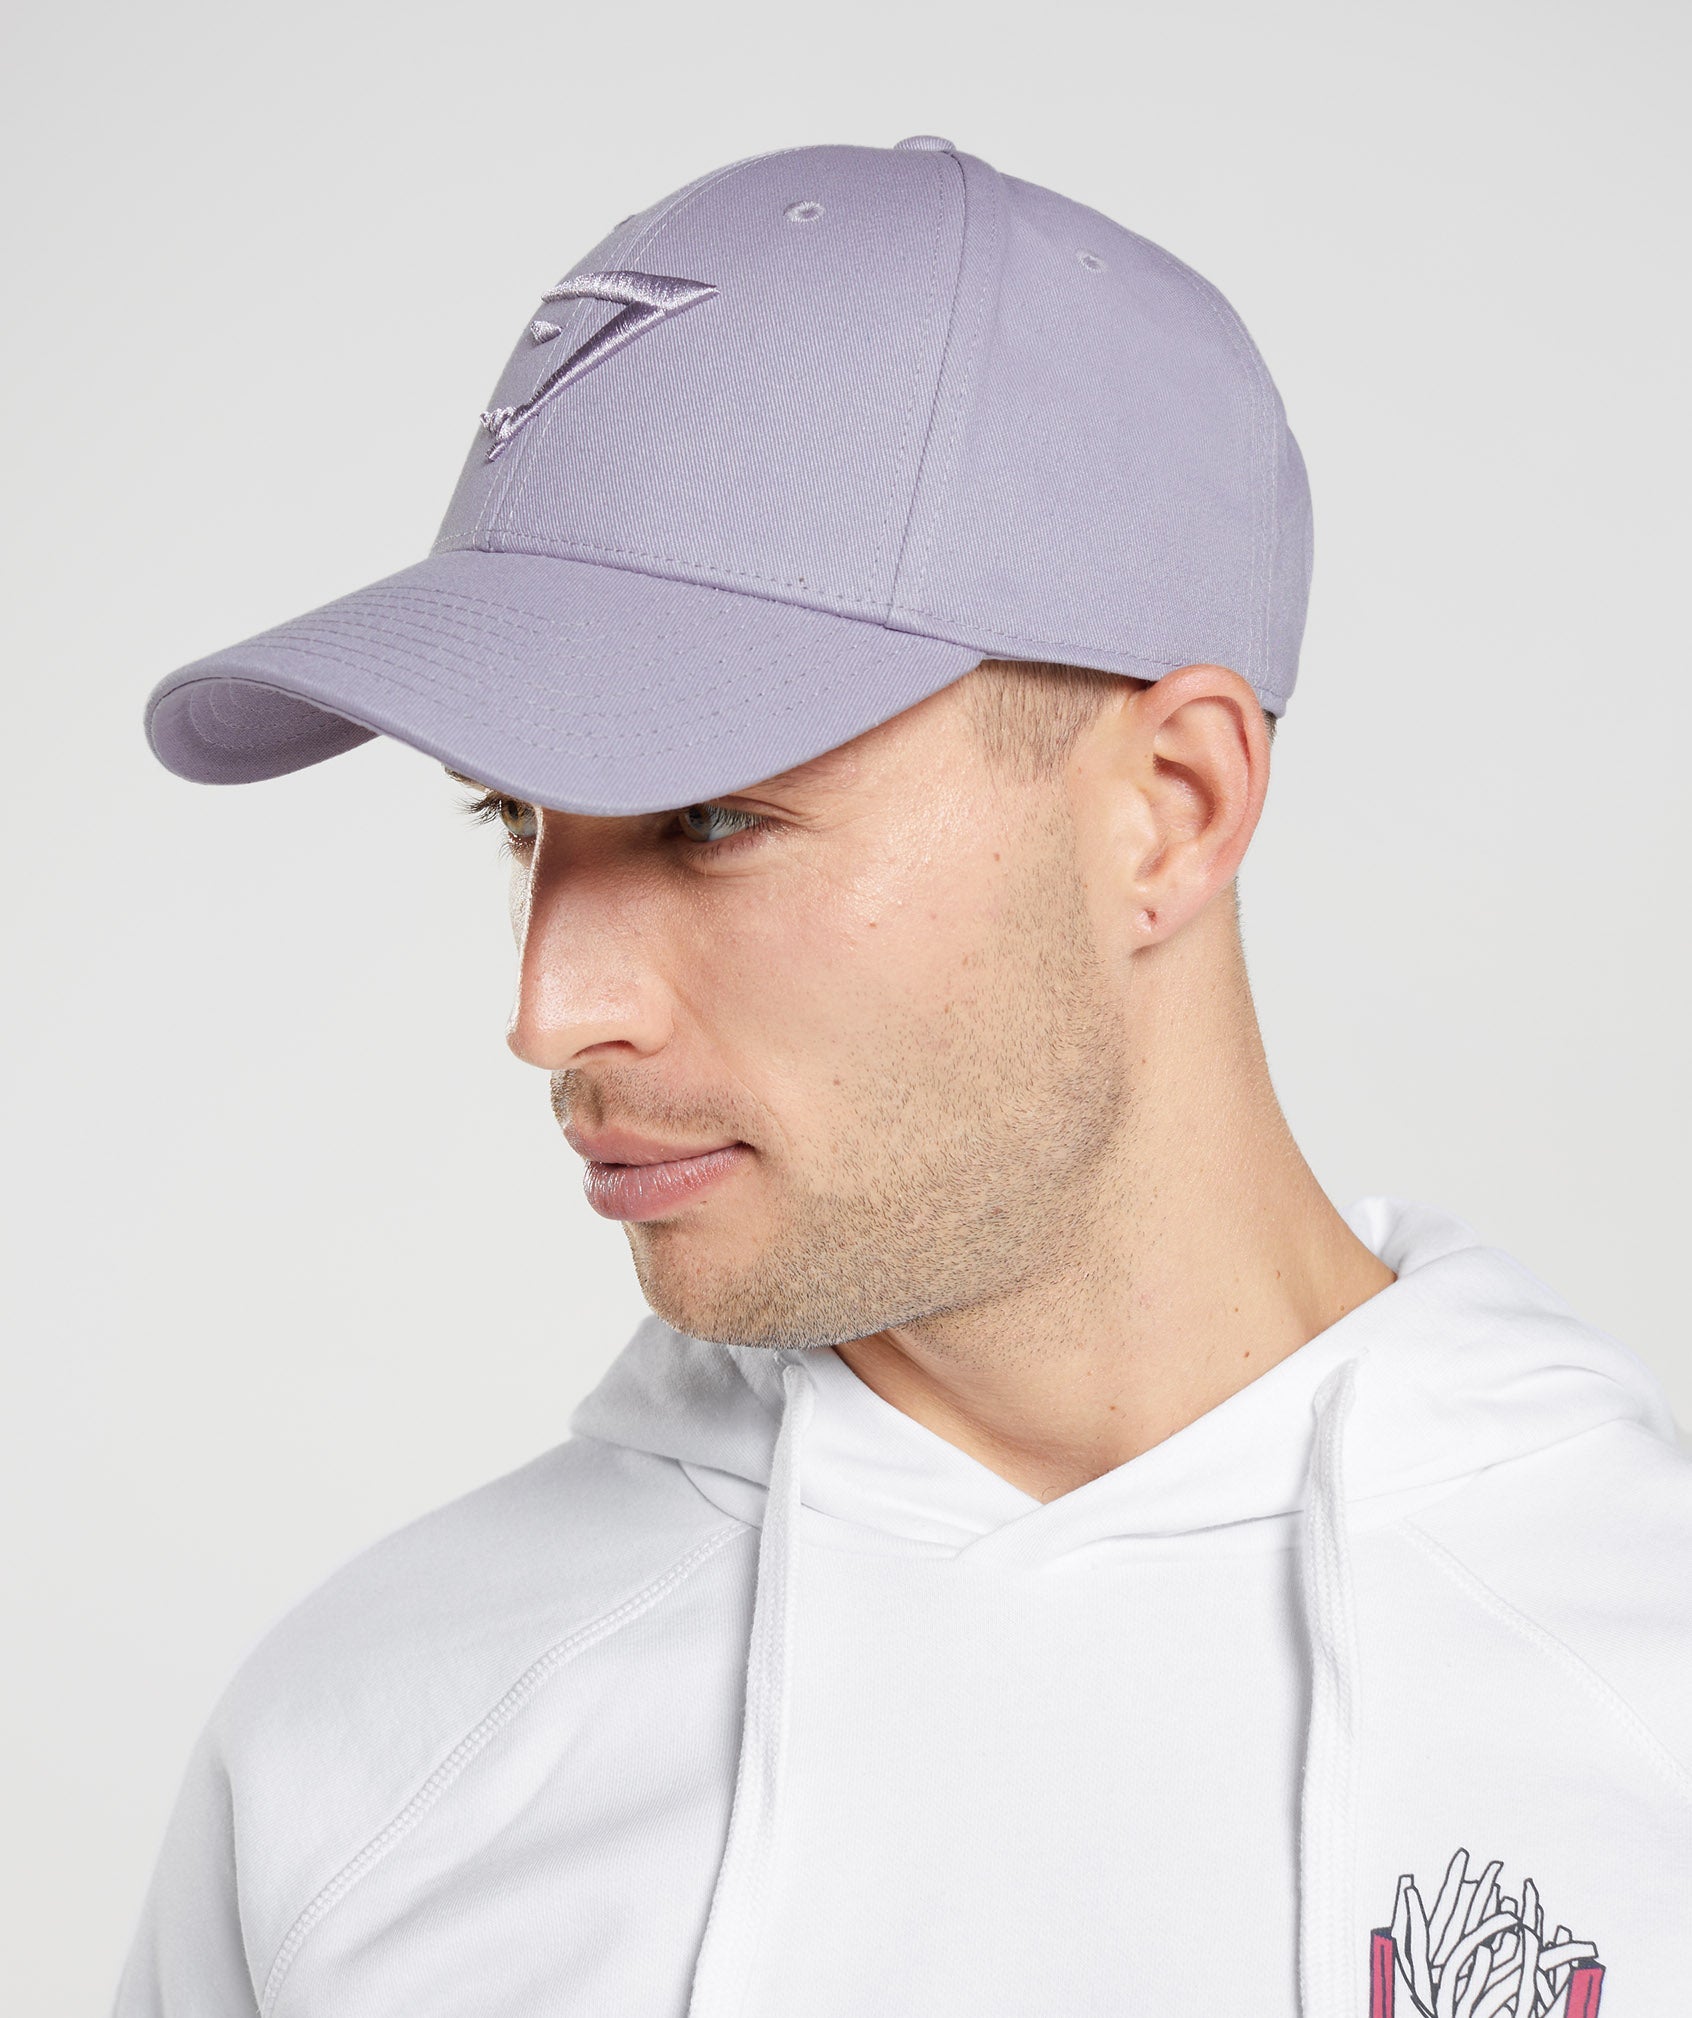 Sharkhead Cap in Shaded Lilac - view 6